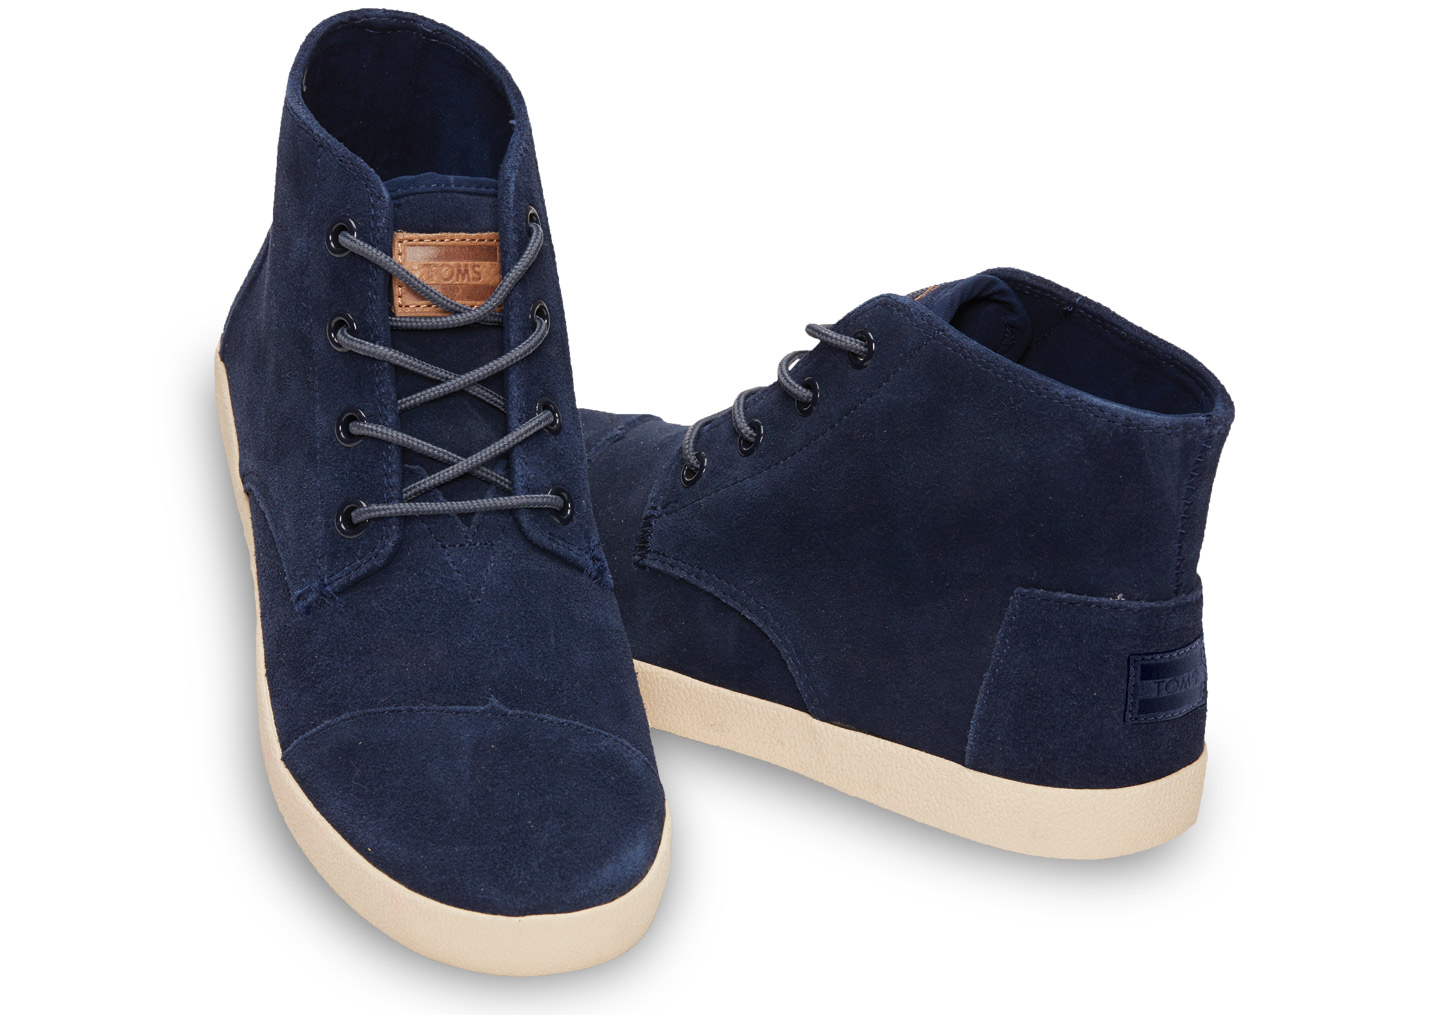 toms high top sneakers womens